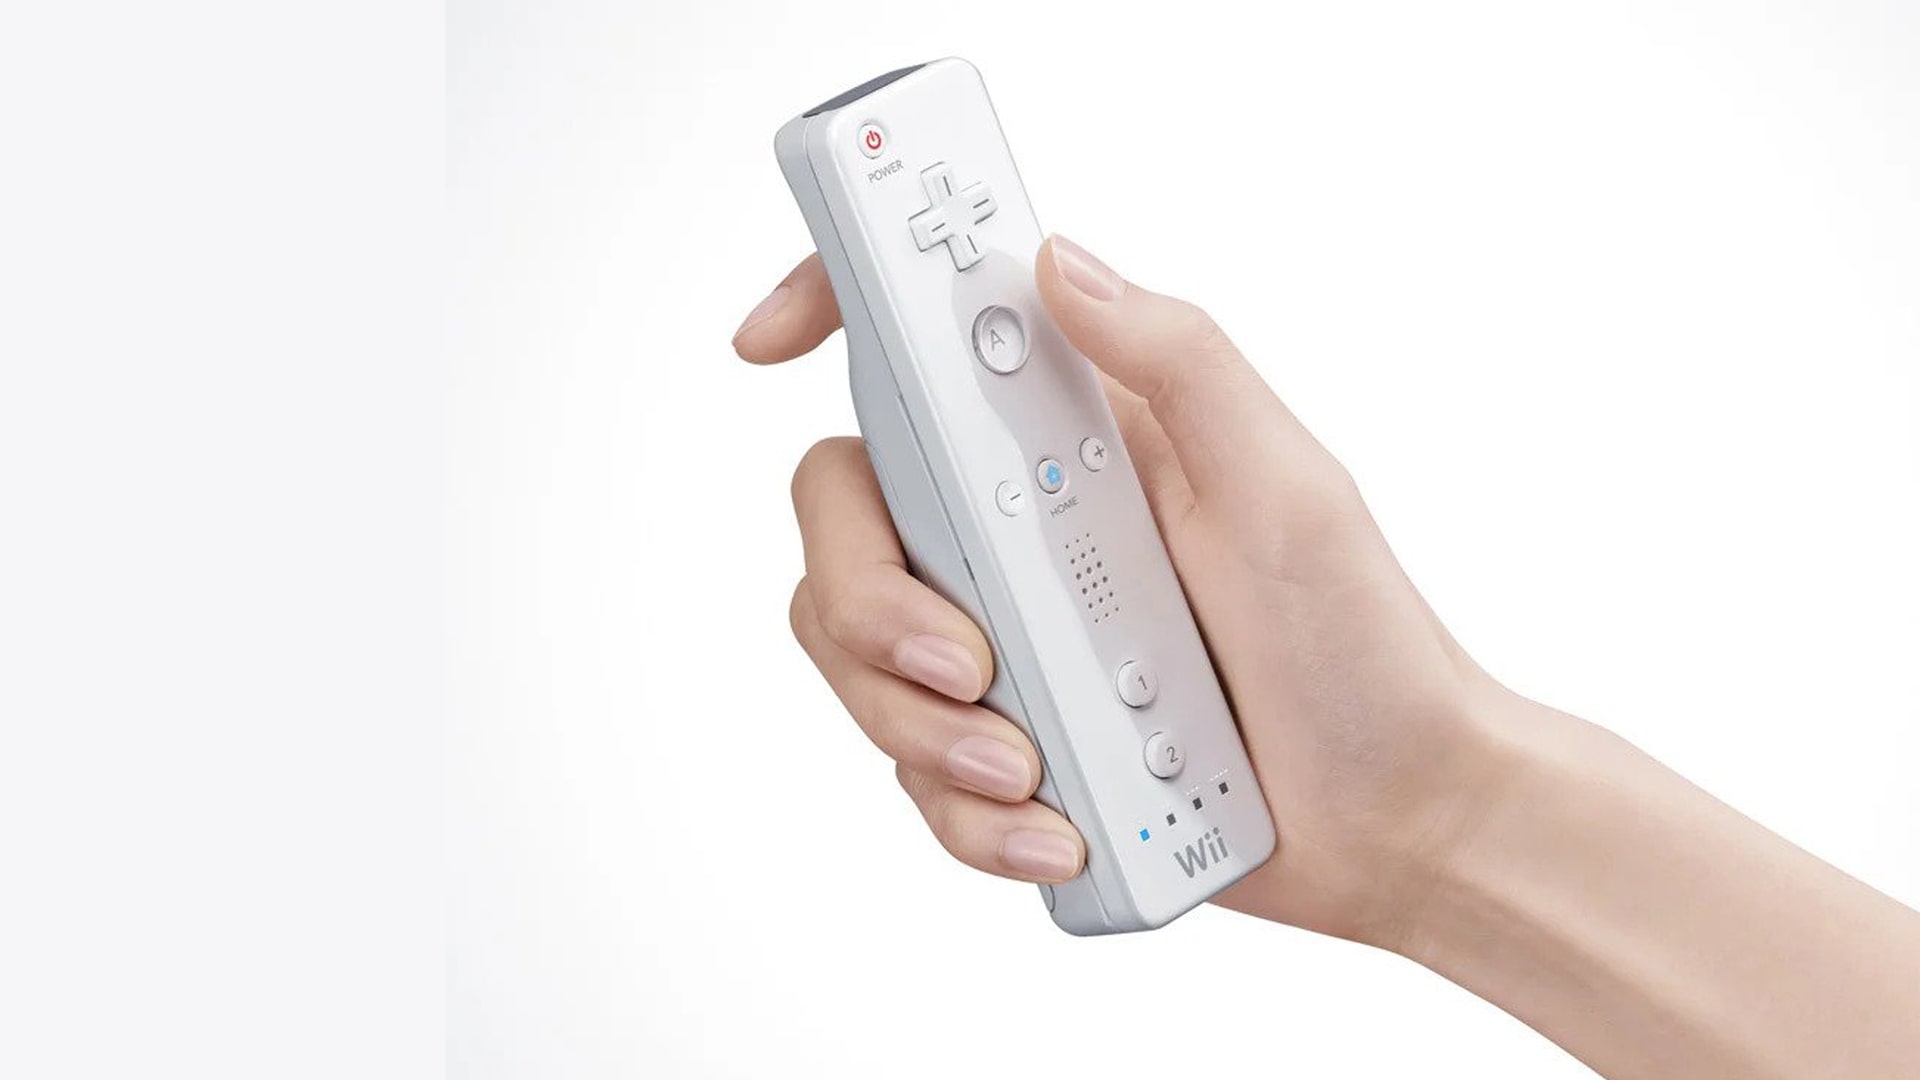 Wii Remote controller on a white background